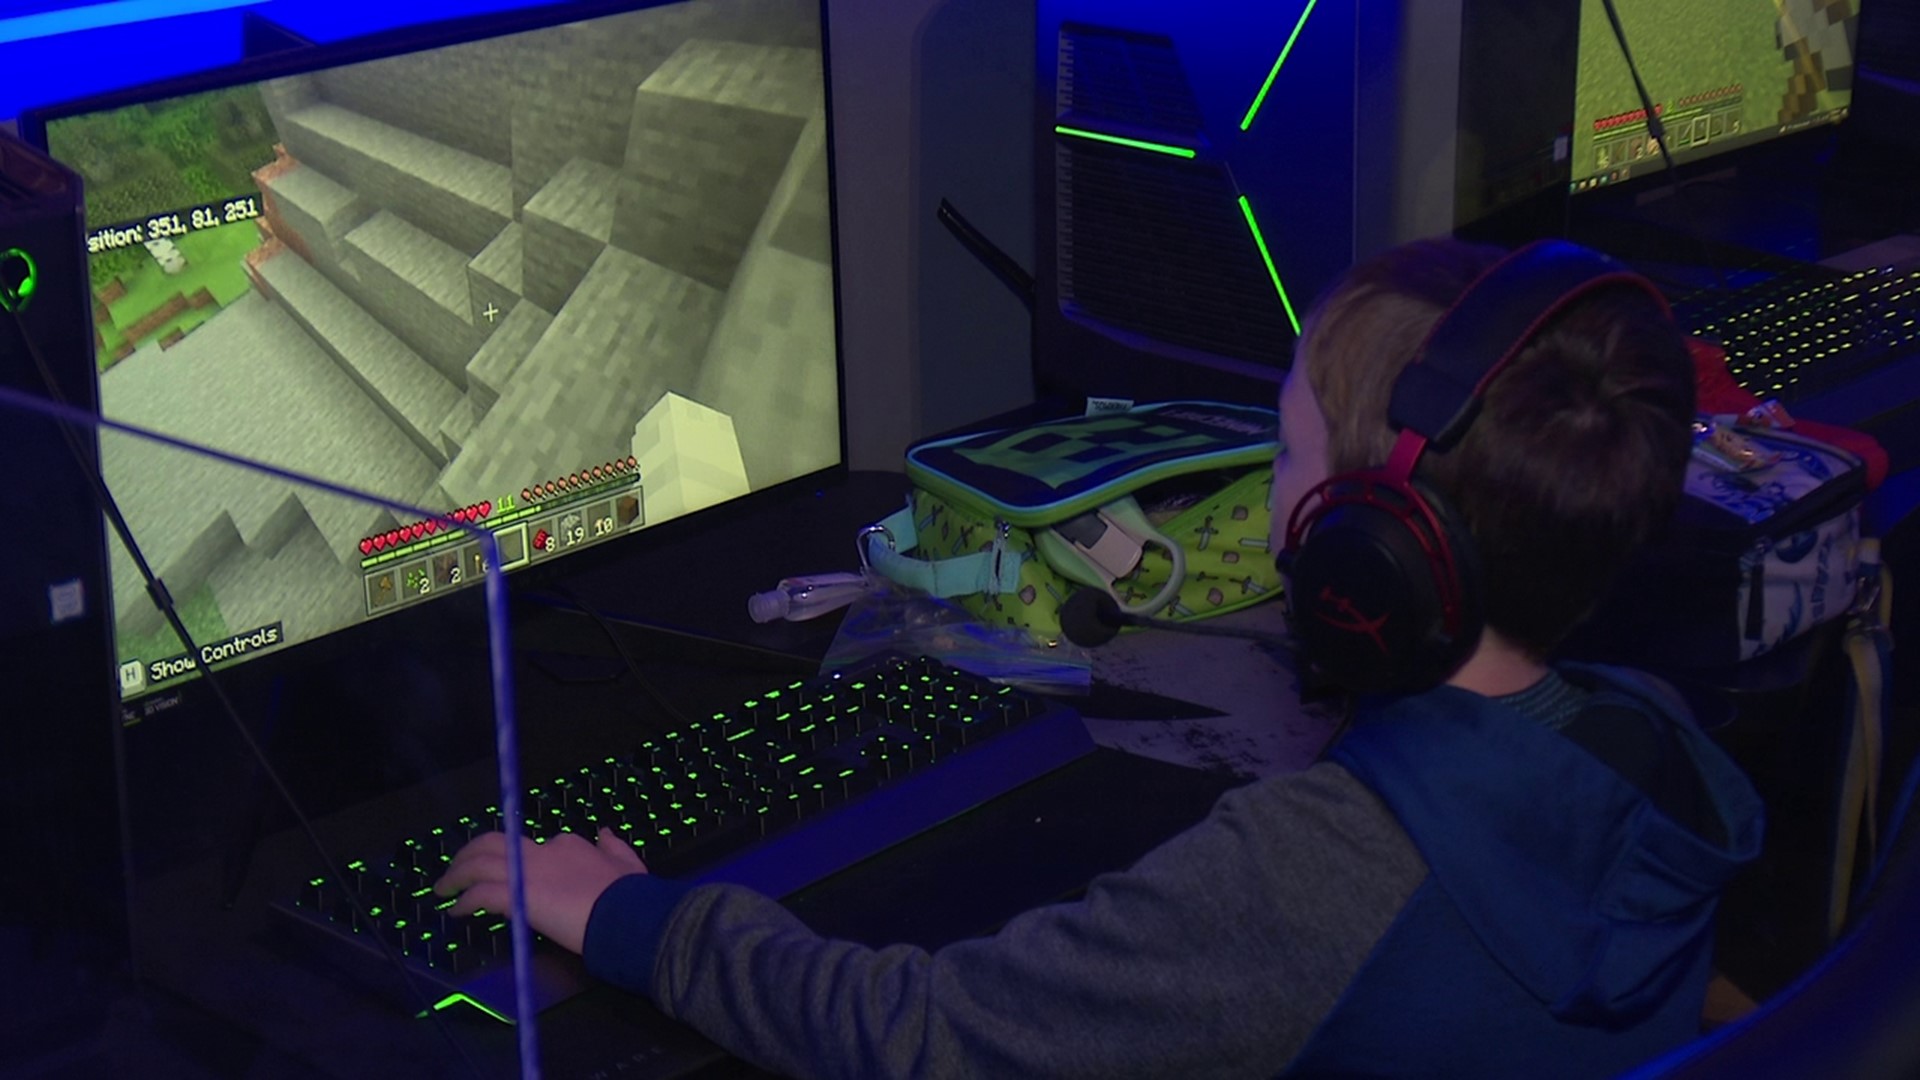 The first esports program in the area is holding a Minecraft Camp with a focus on STEM learning.